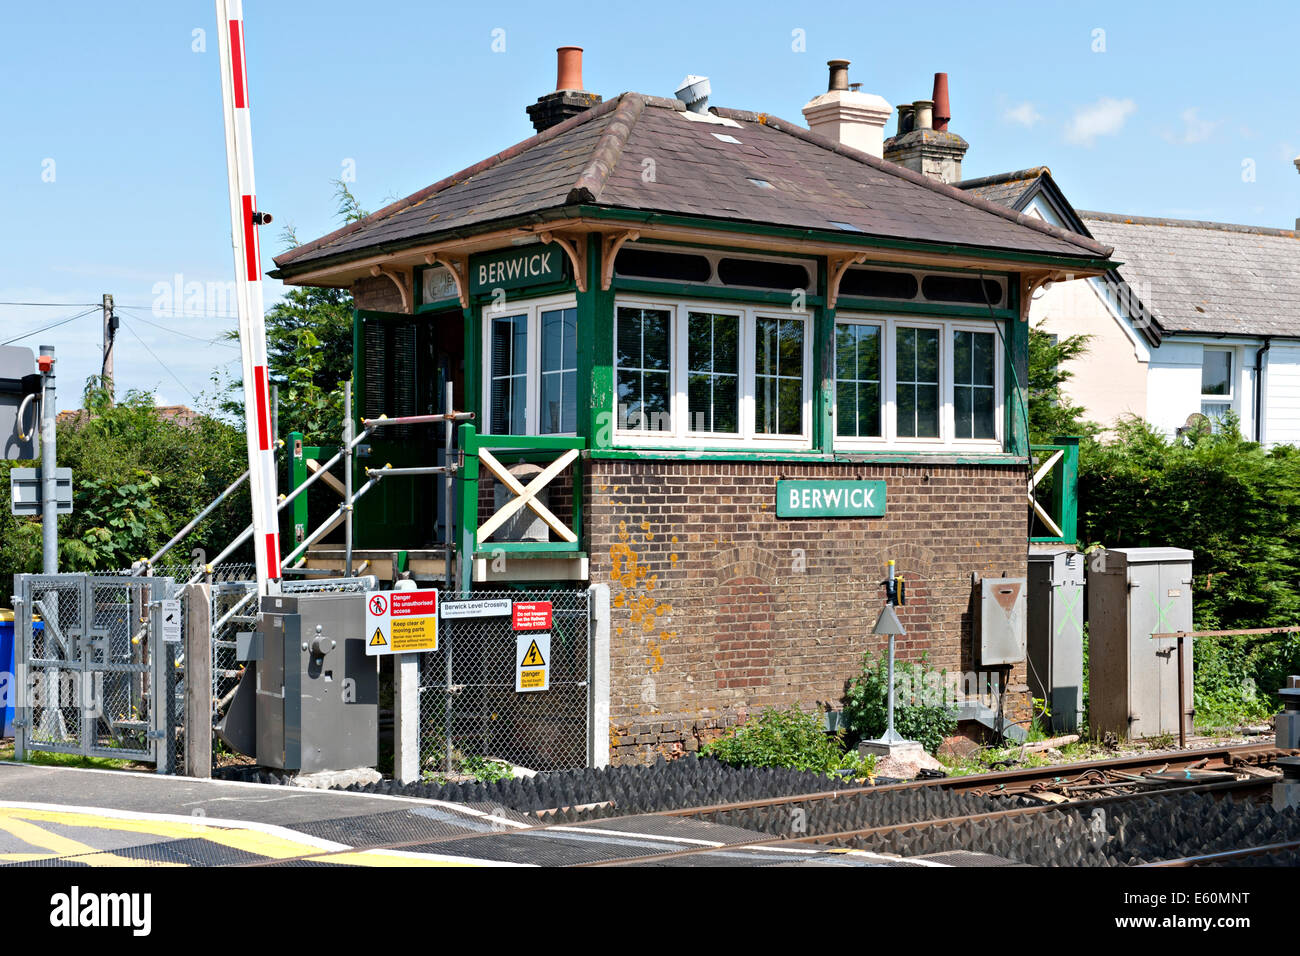 The signal box at the railway crossing at Berwick, Sussex. UK Stock Photo